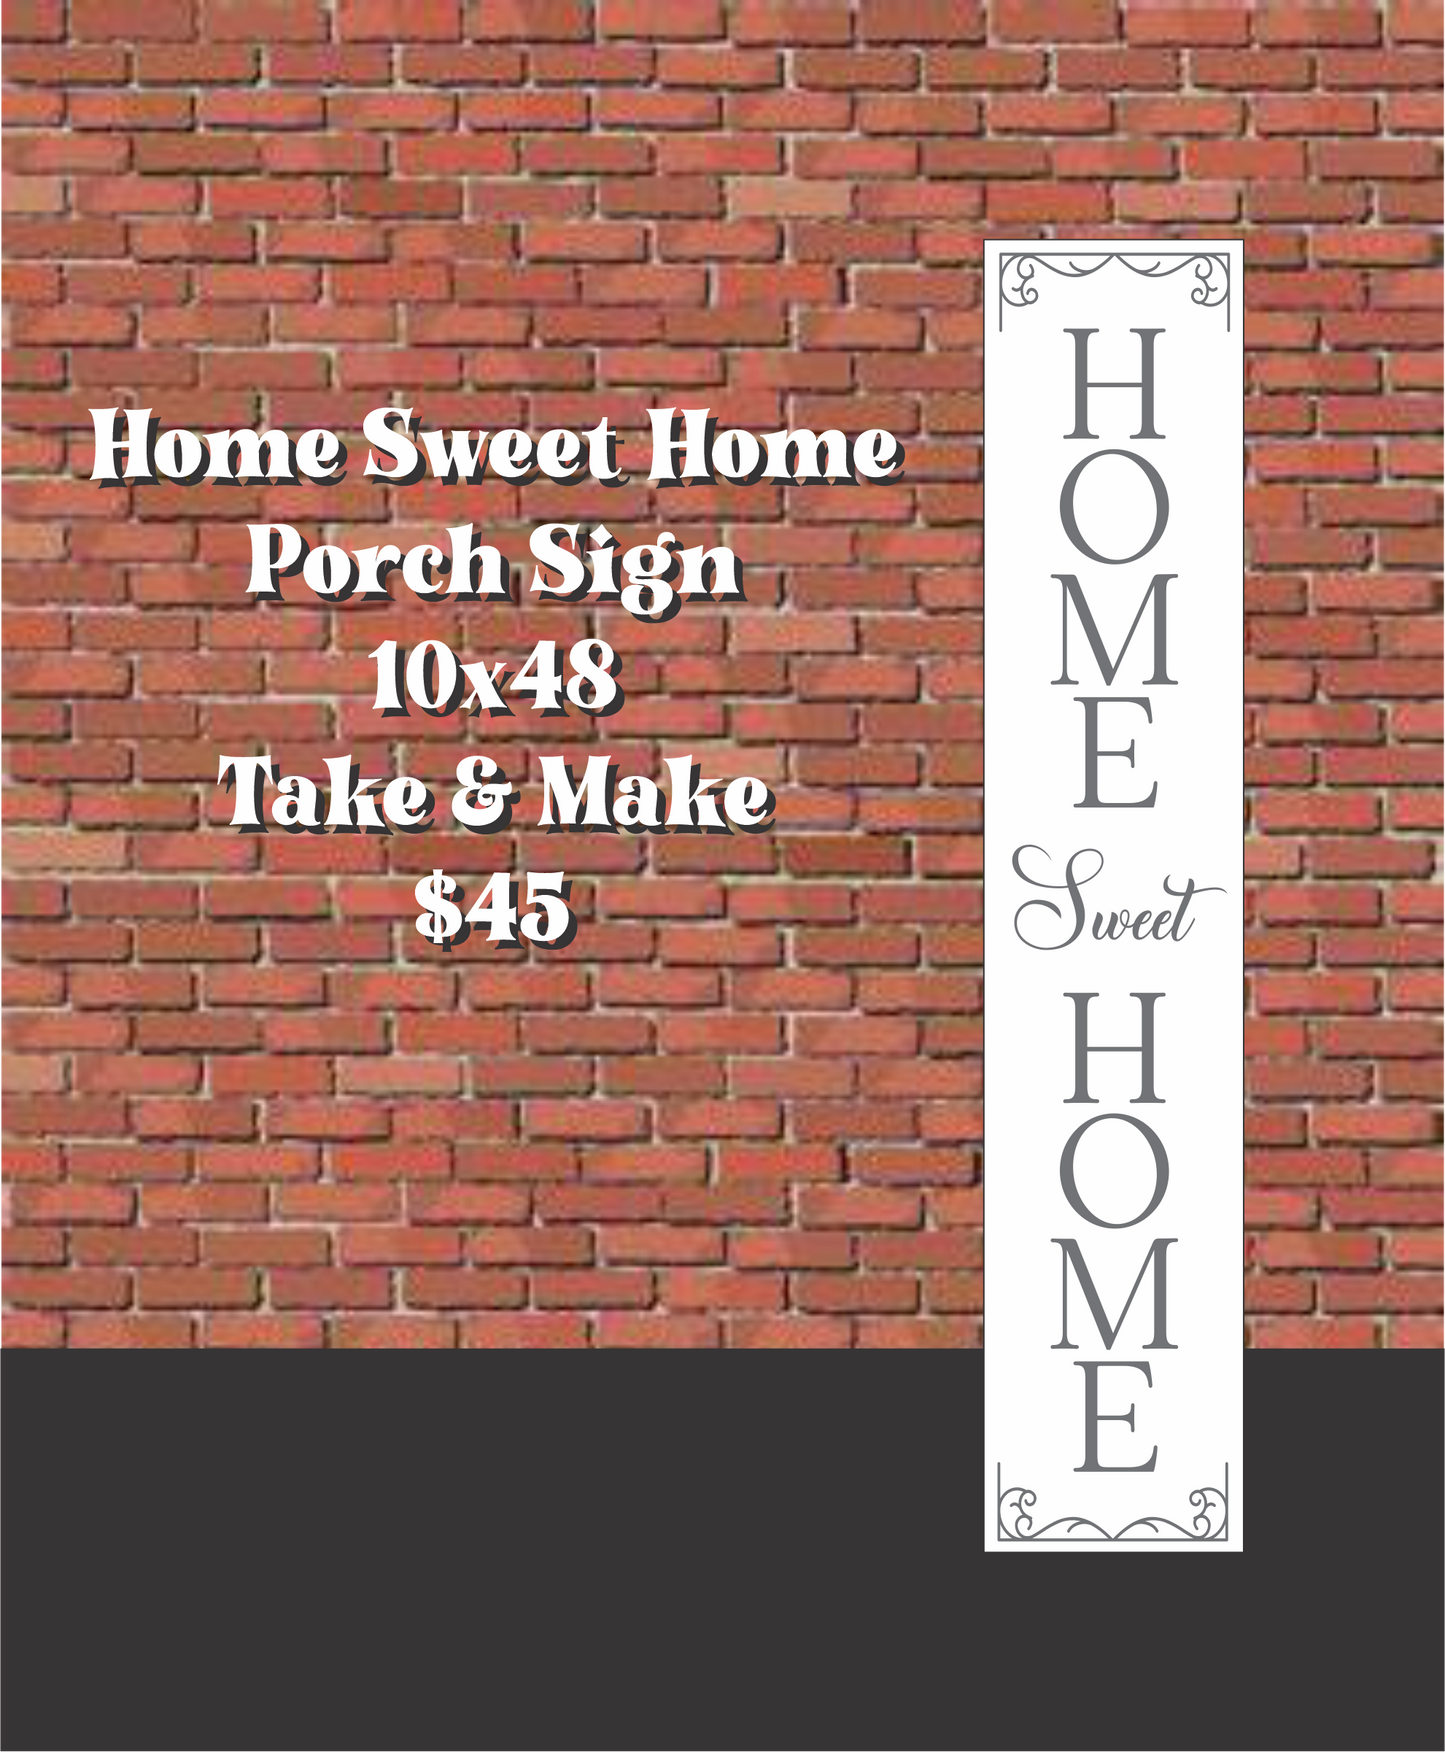 Home Sweet Home Porch Sign Kit